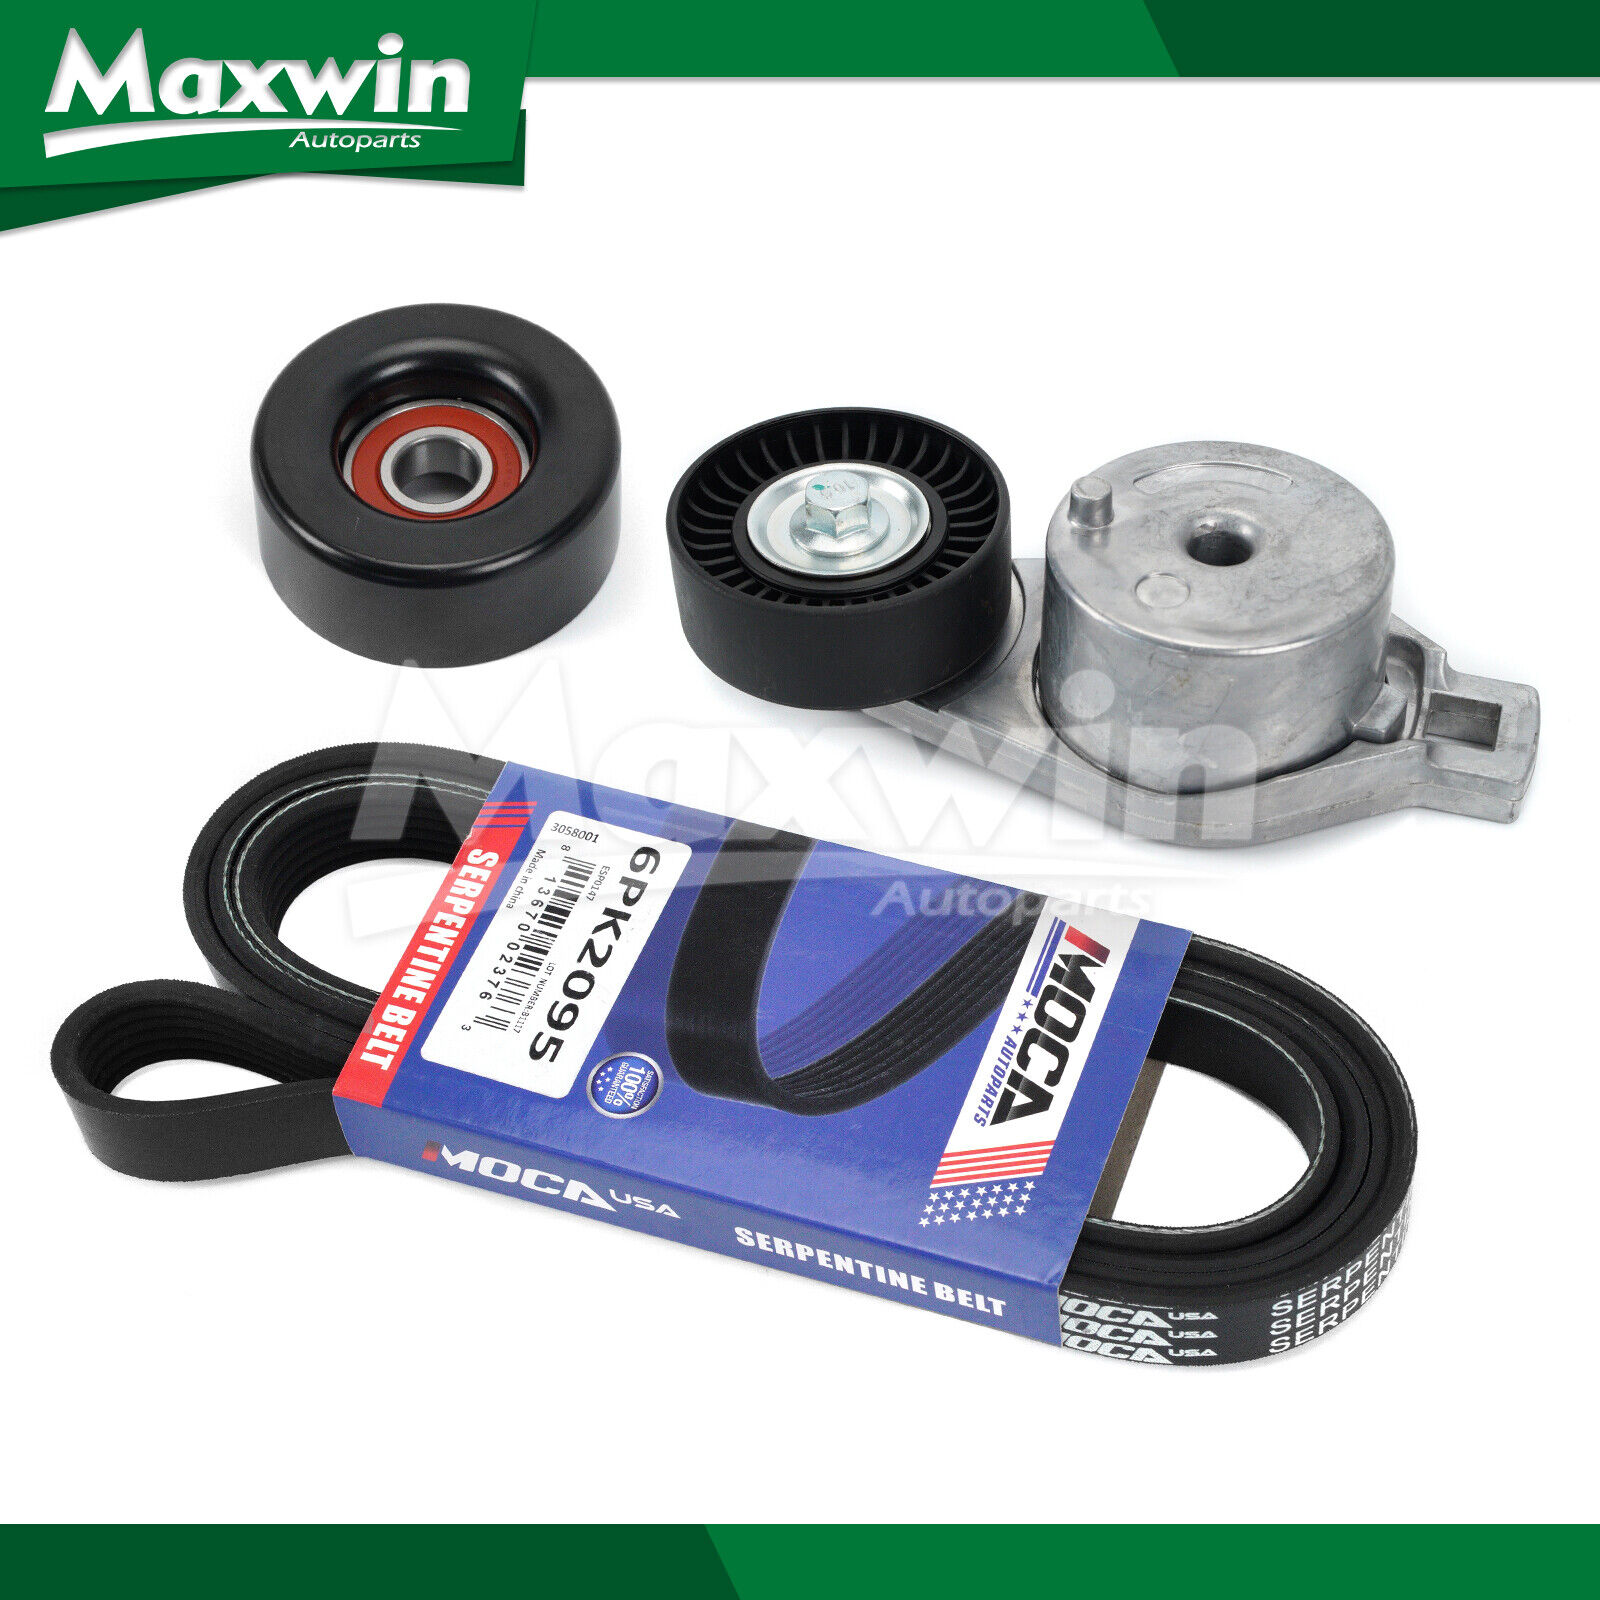 Serpentine Belt Drive Component Kit new for Dodge Caravan Chrysler Town&Country